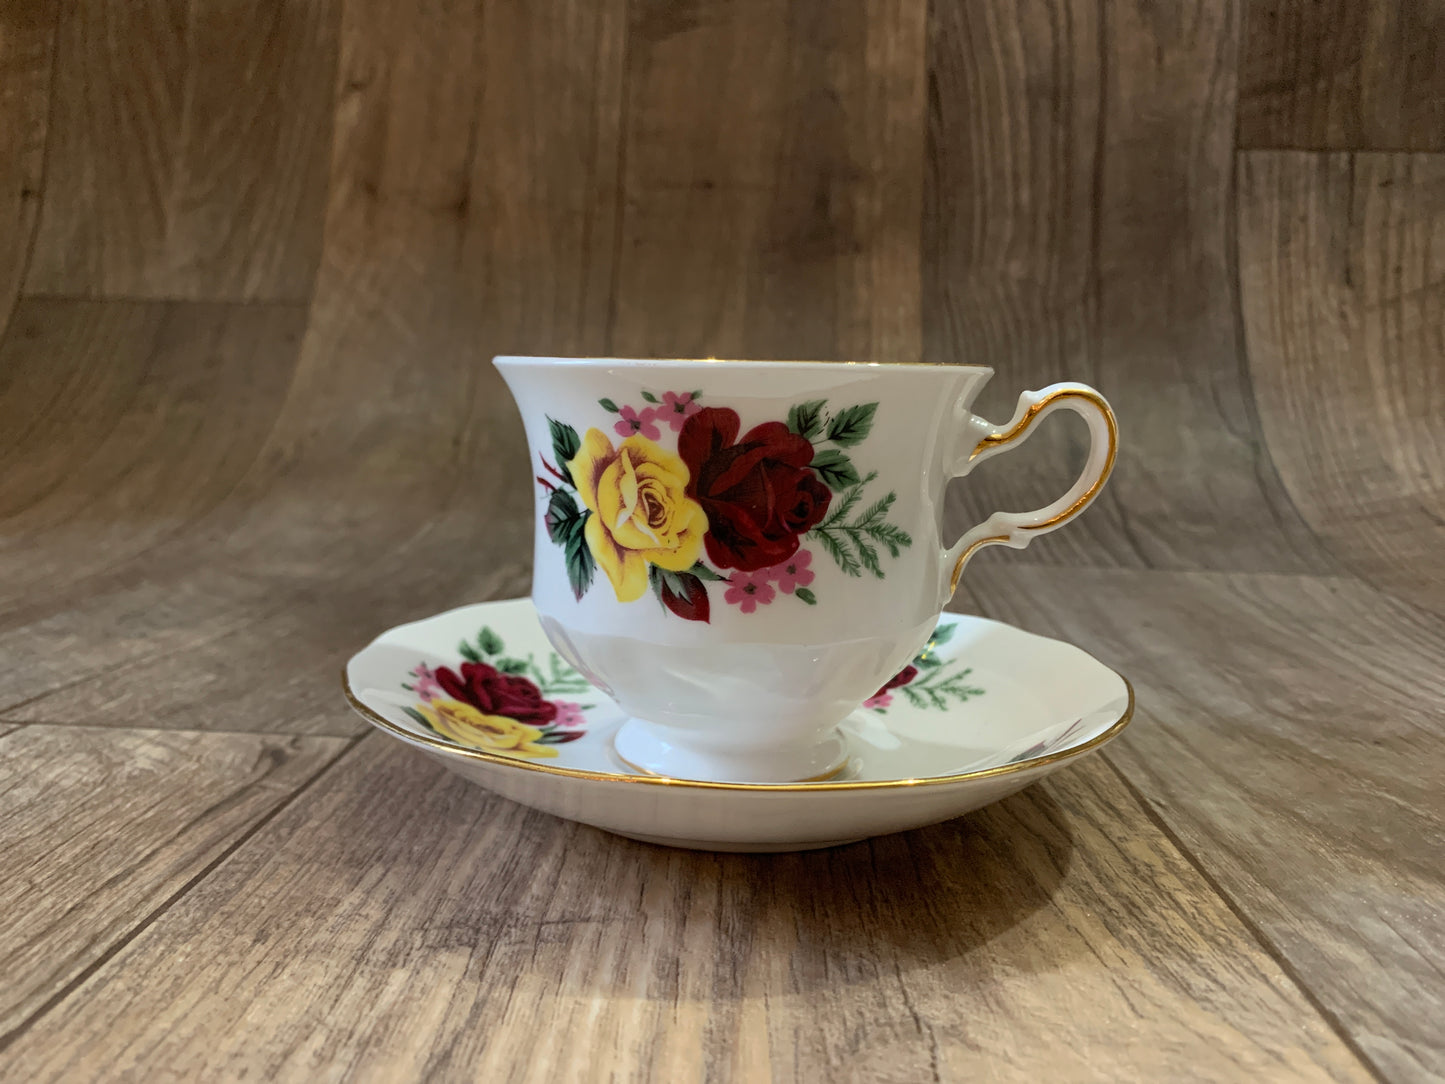 Vintage Teacup with Red and Yellow Rose Floral Pattern Queen Anne Tea Cup and Saucer